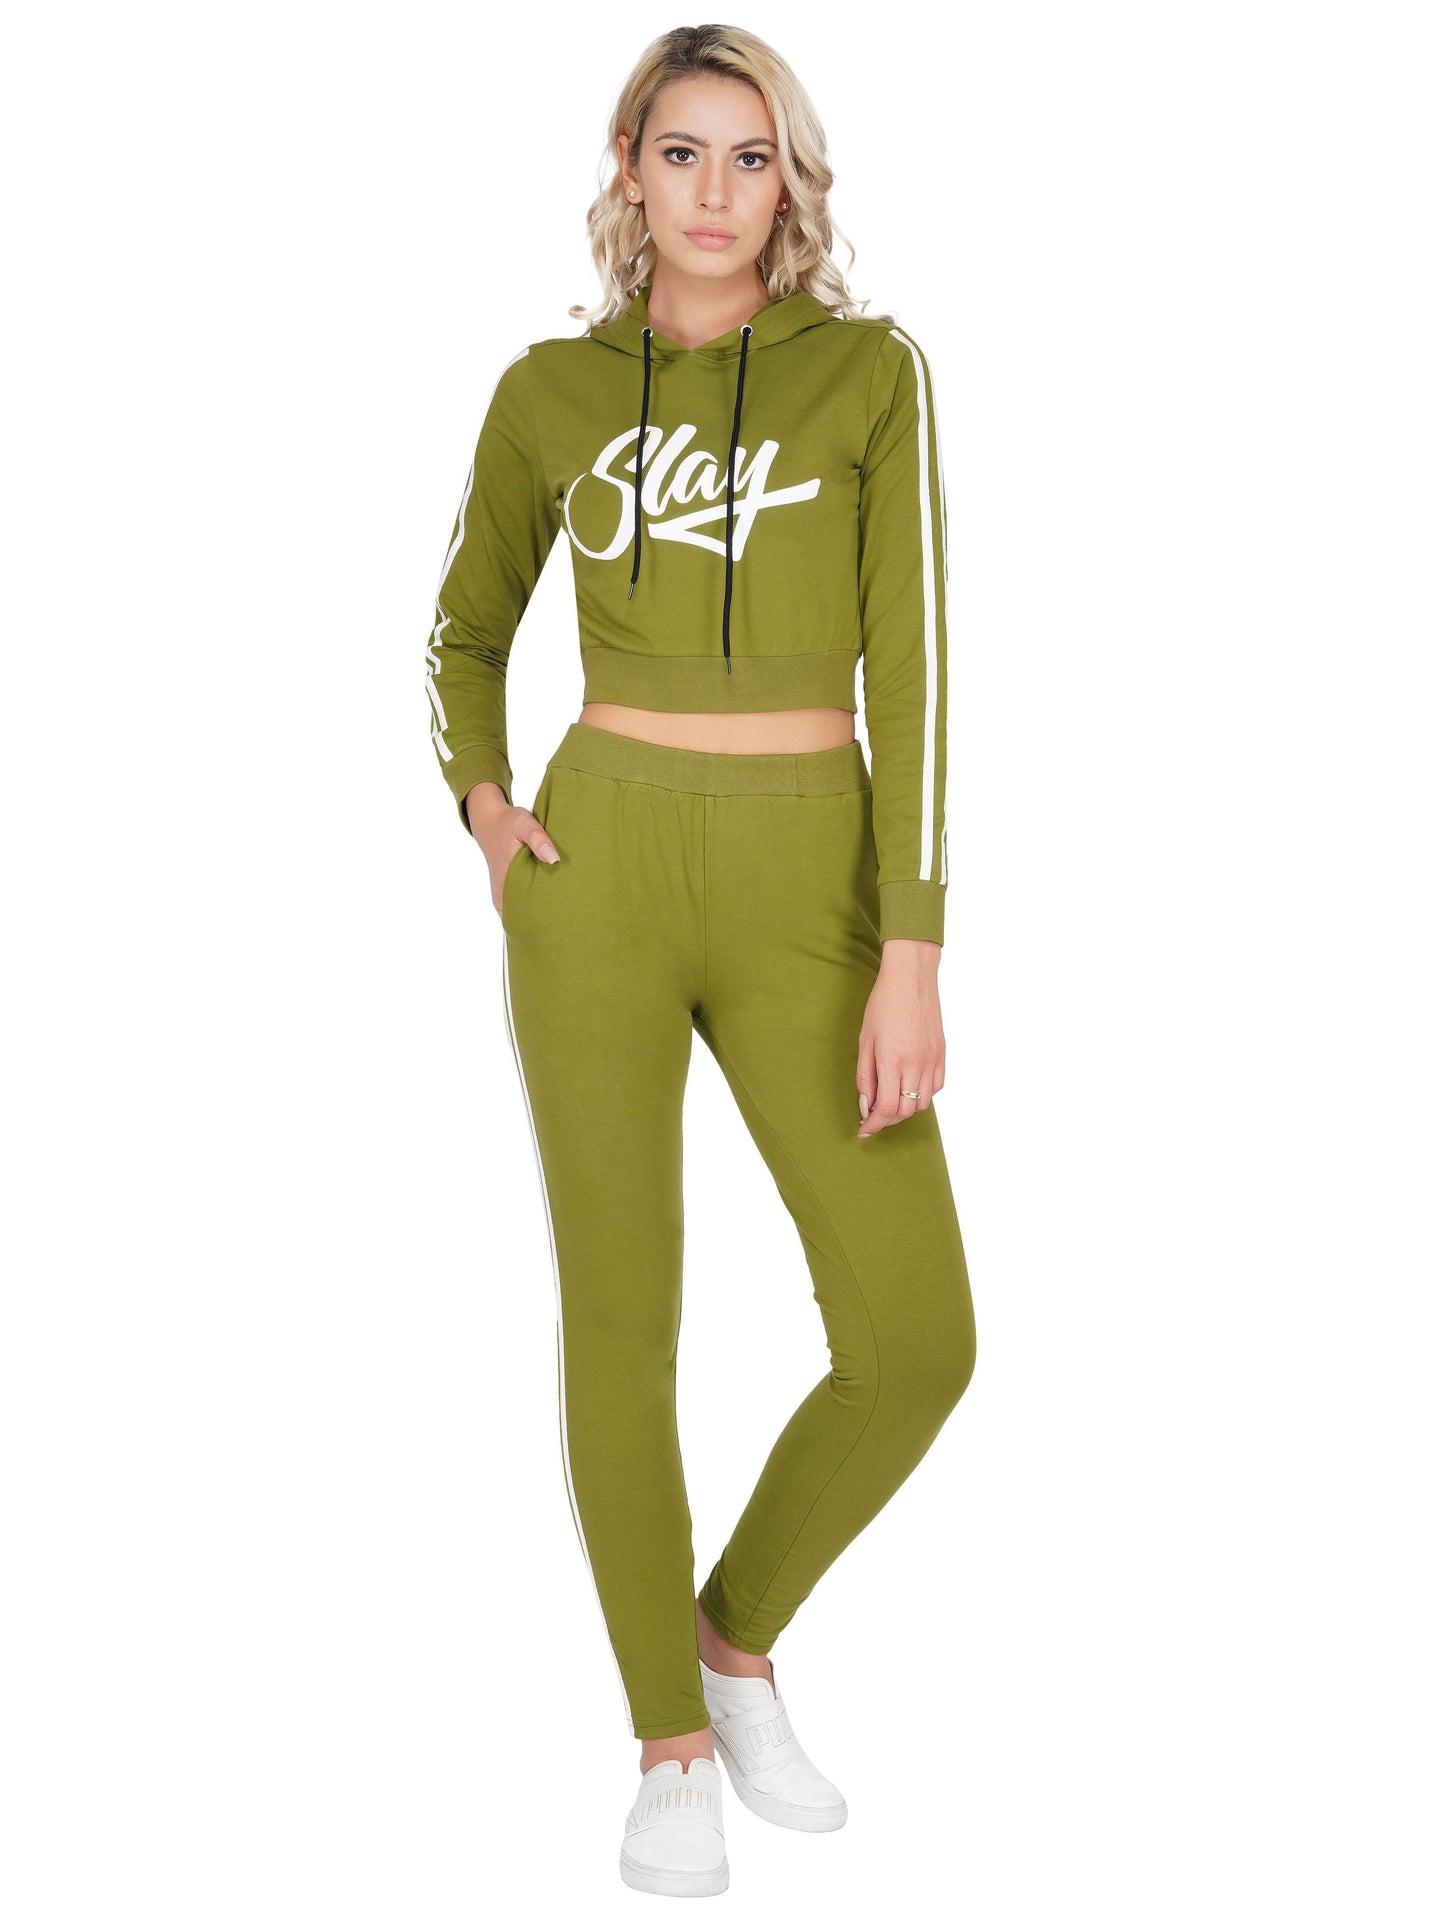 SLAY. Sport Women's Olive Green Printed Tracksuit with White Side Stripes-clothing-to-slay.myshopify.com-Tracksuit